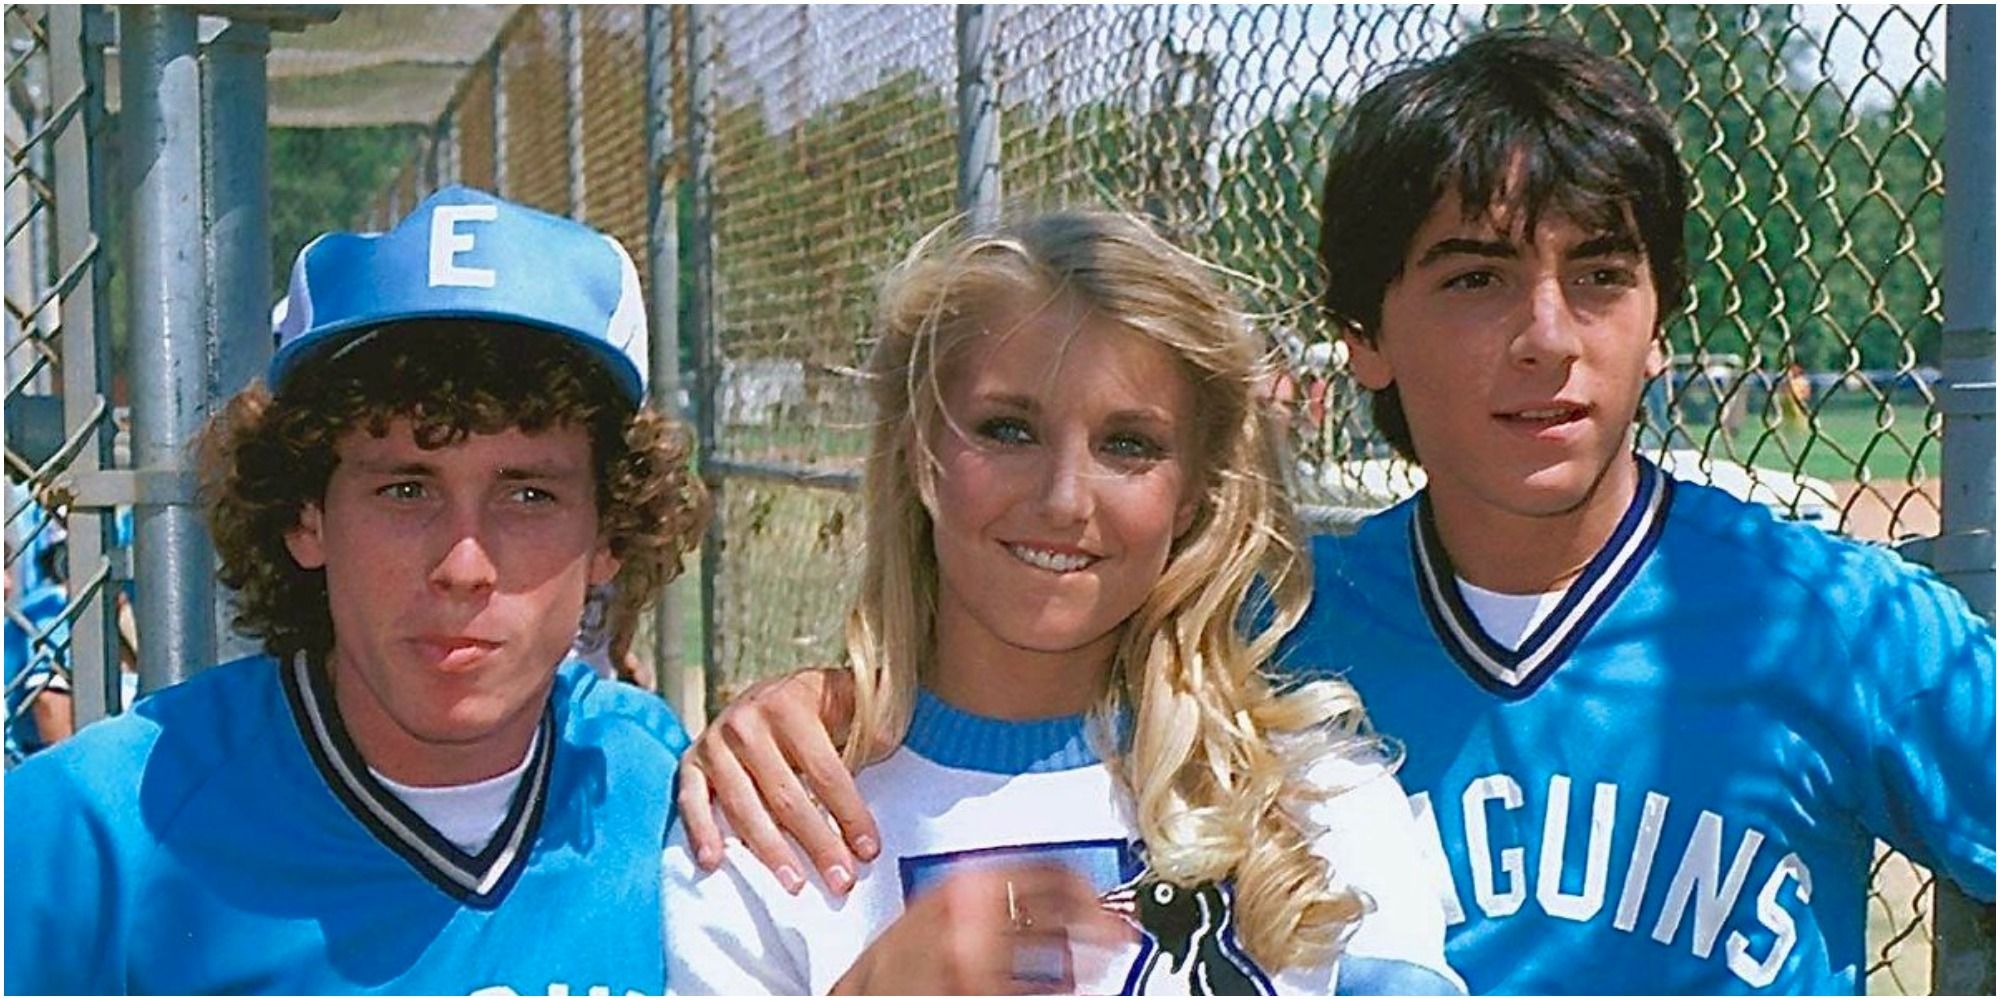 A screenshot of Willie Aames as Peyton Nichols, Heather Thomas as Jane Mitchell and Scott Baio as Barney Springboro from Zapped!